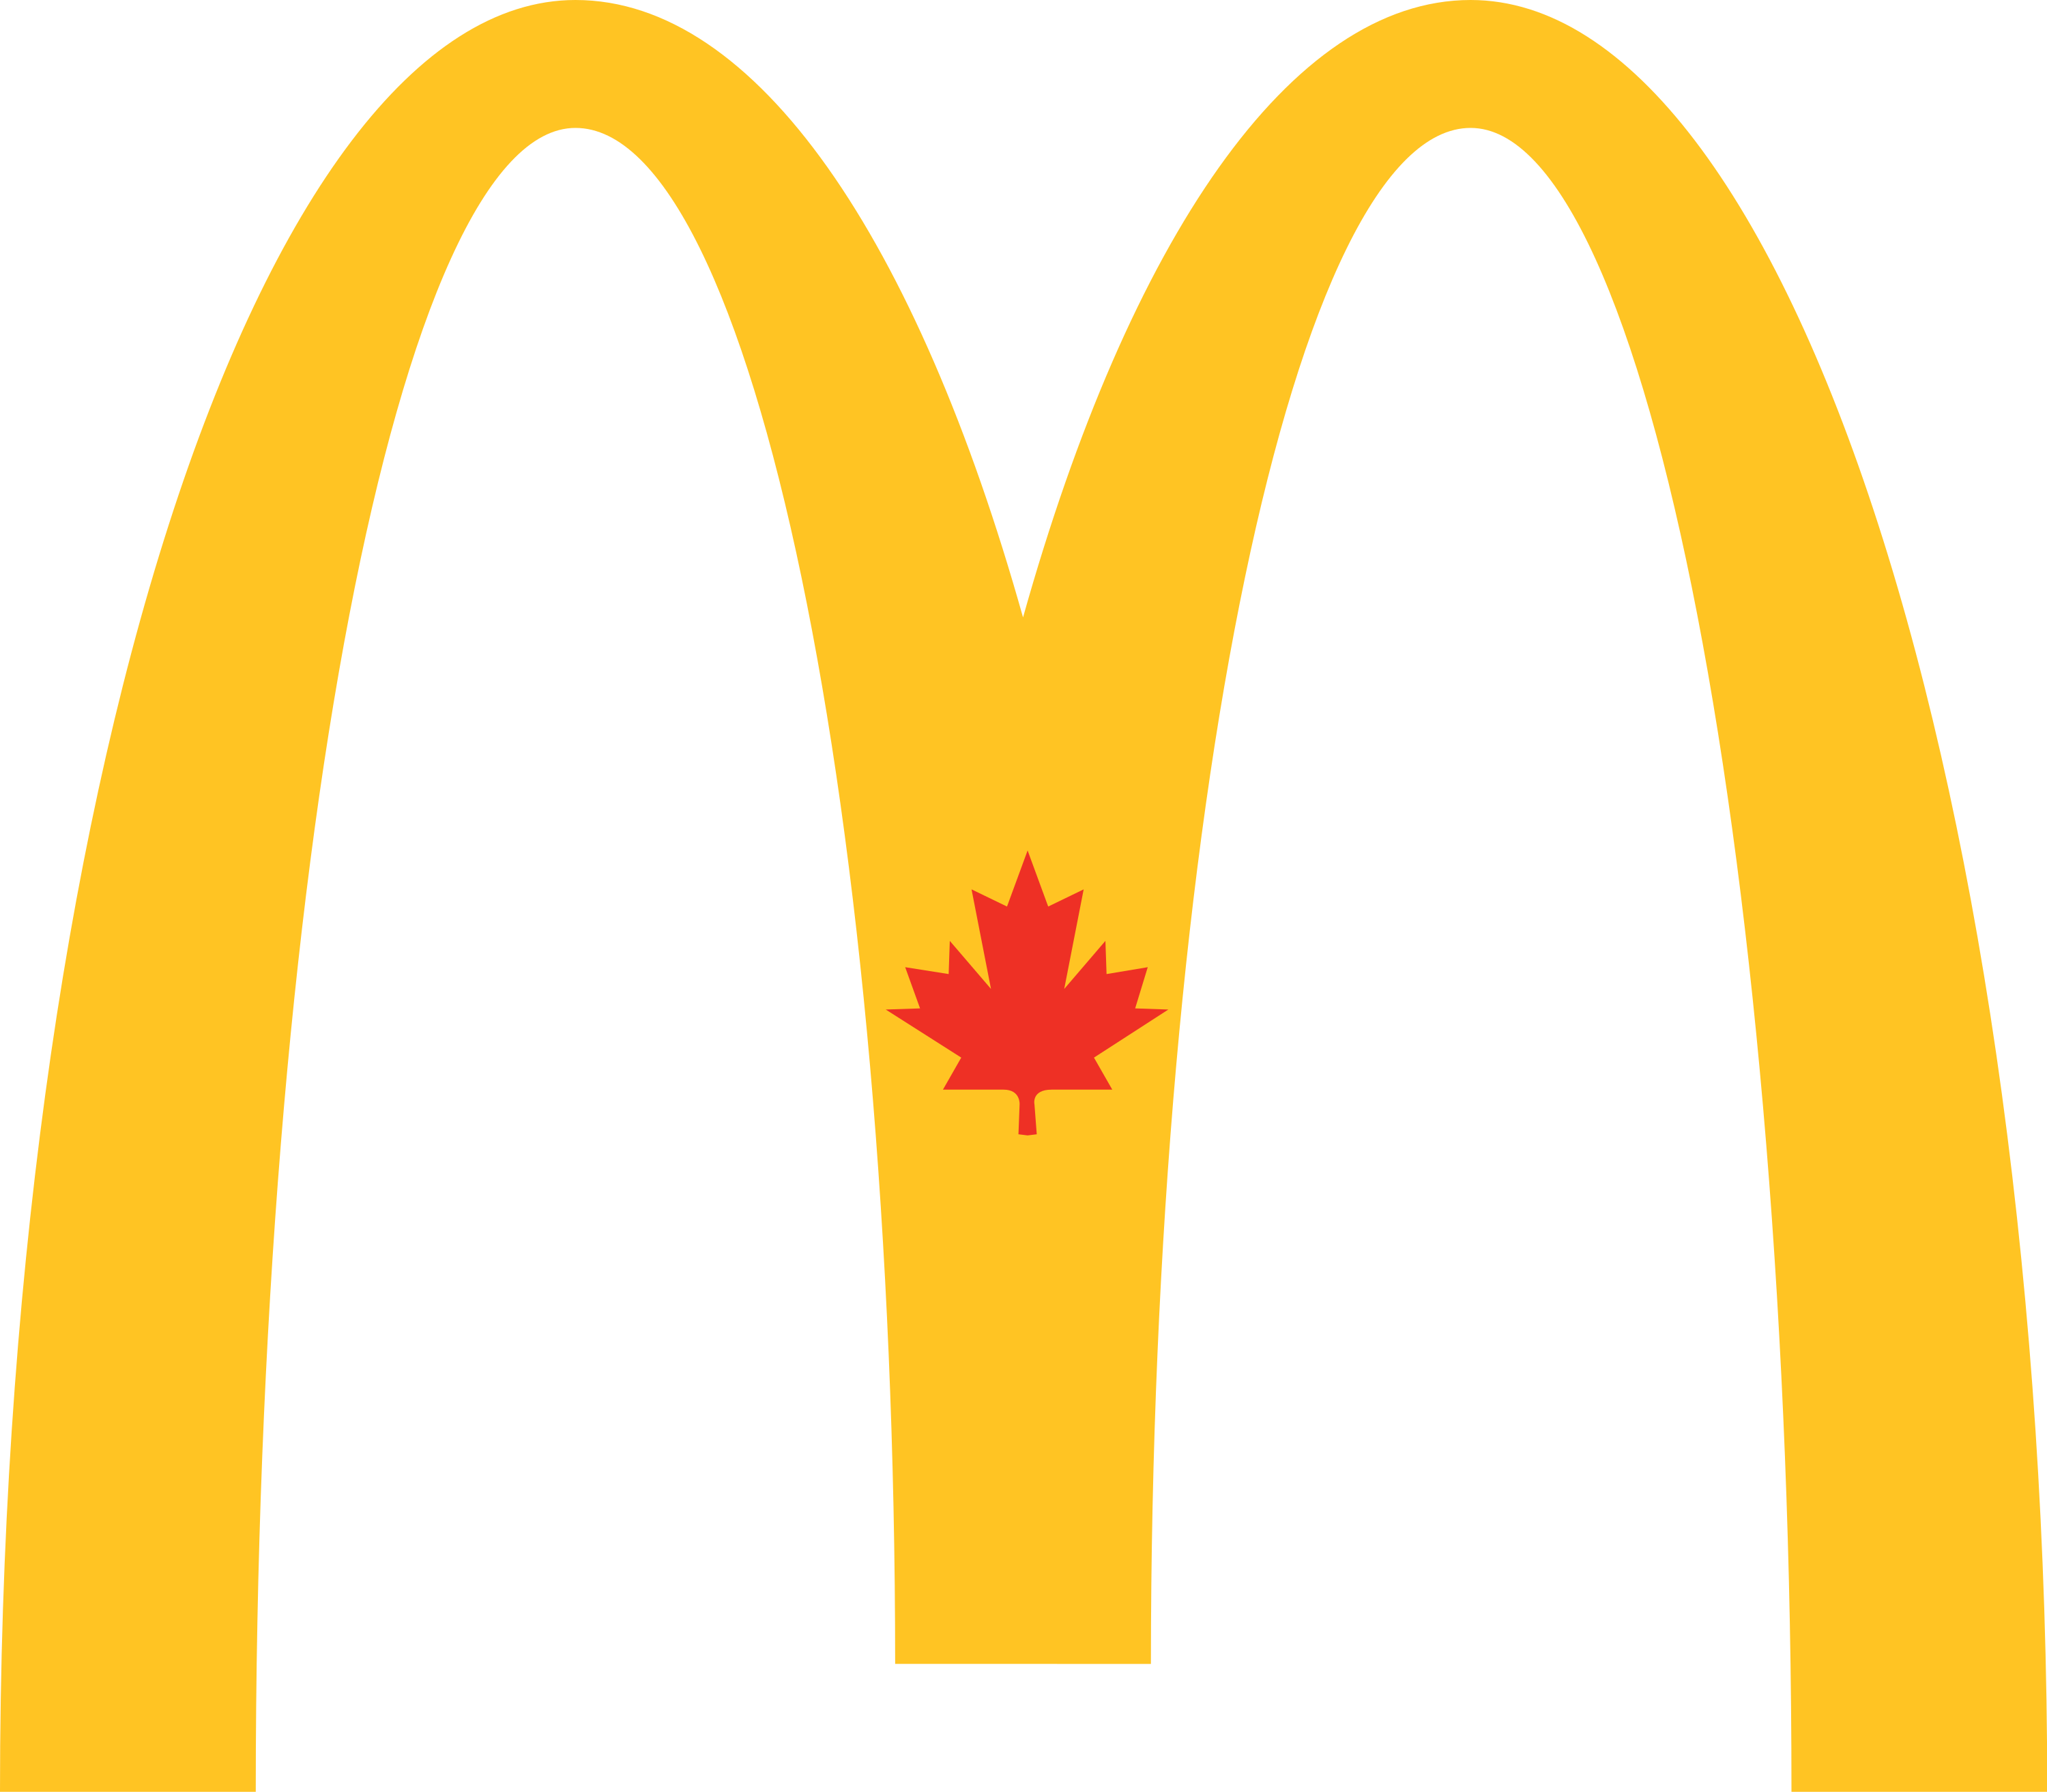 McDonald's Golden Arches Logo Download in SVG Vector or PNG File Format